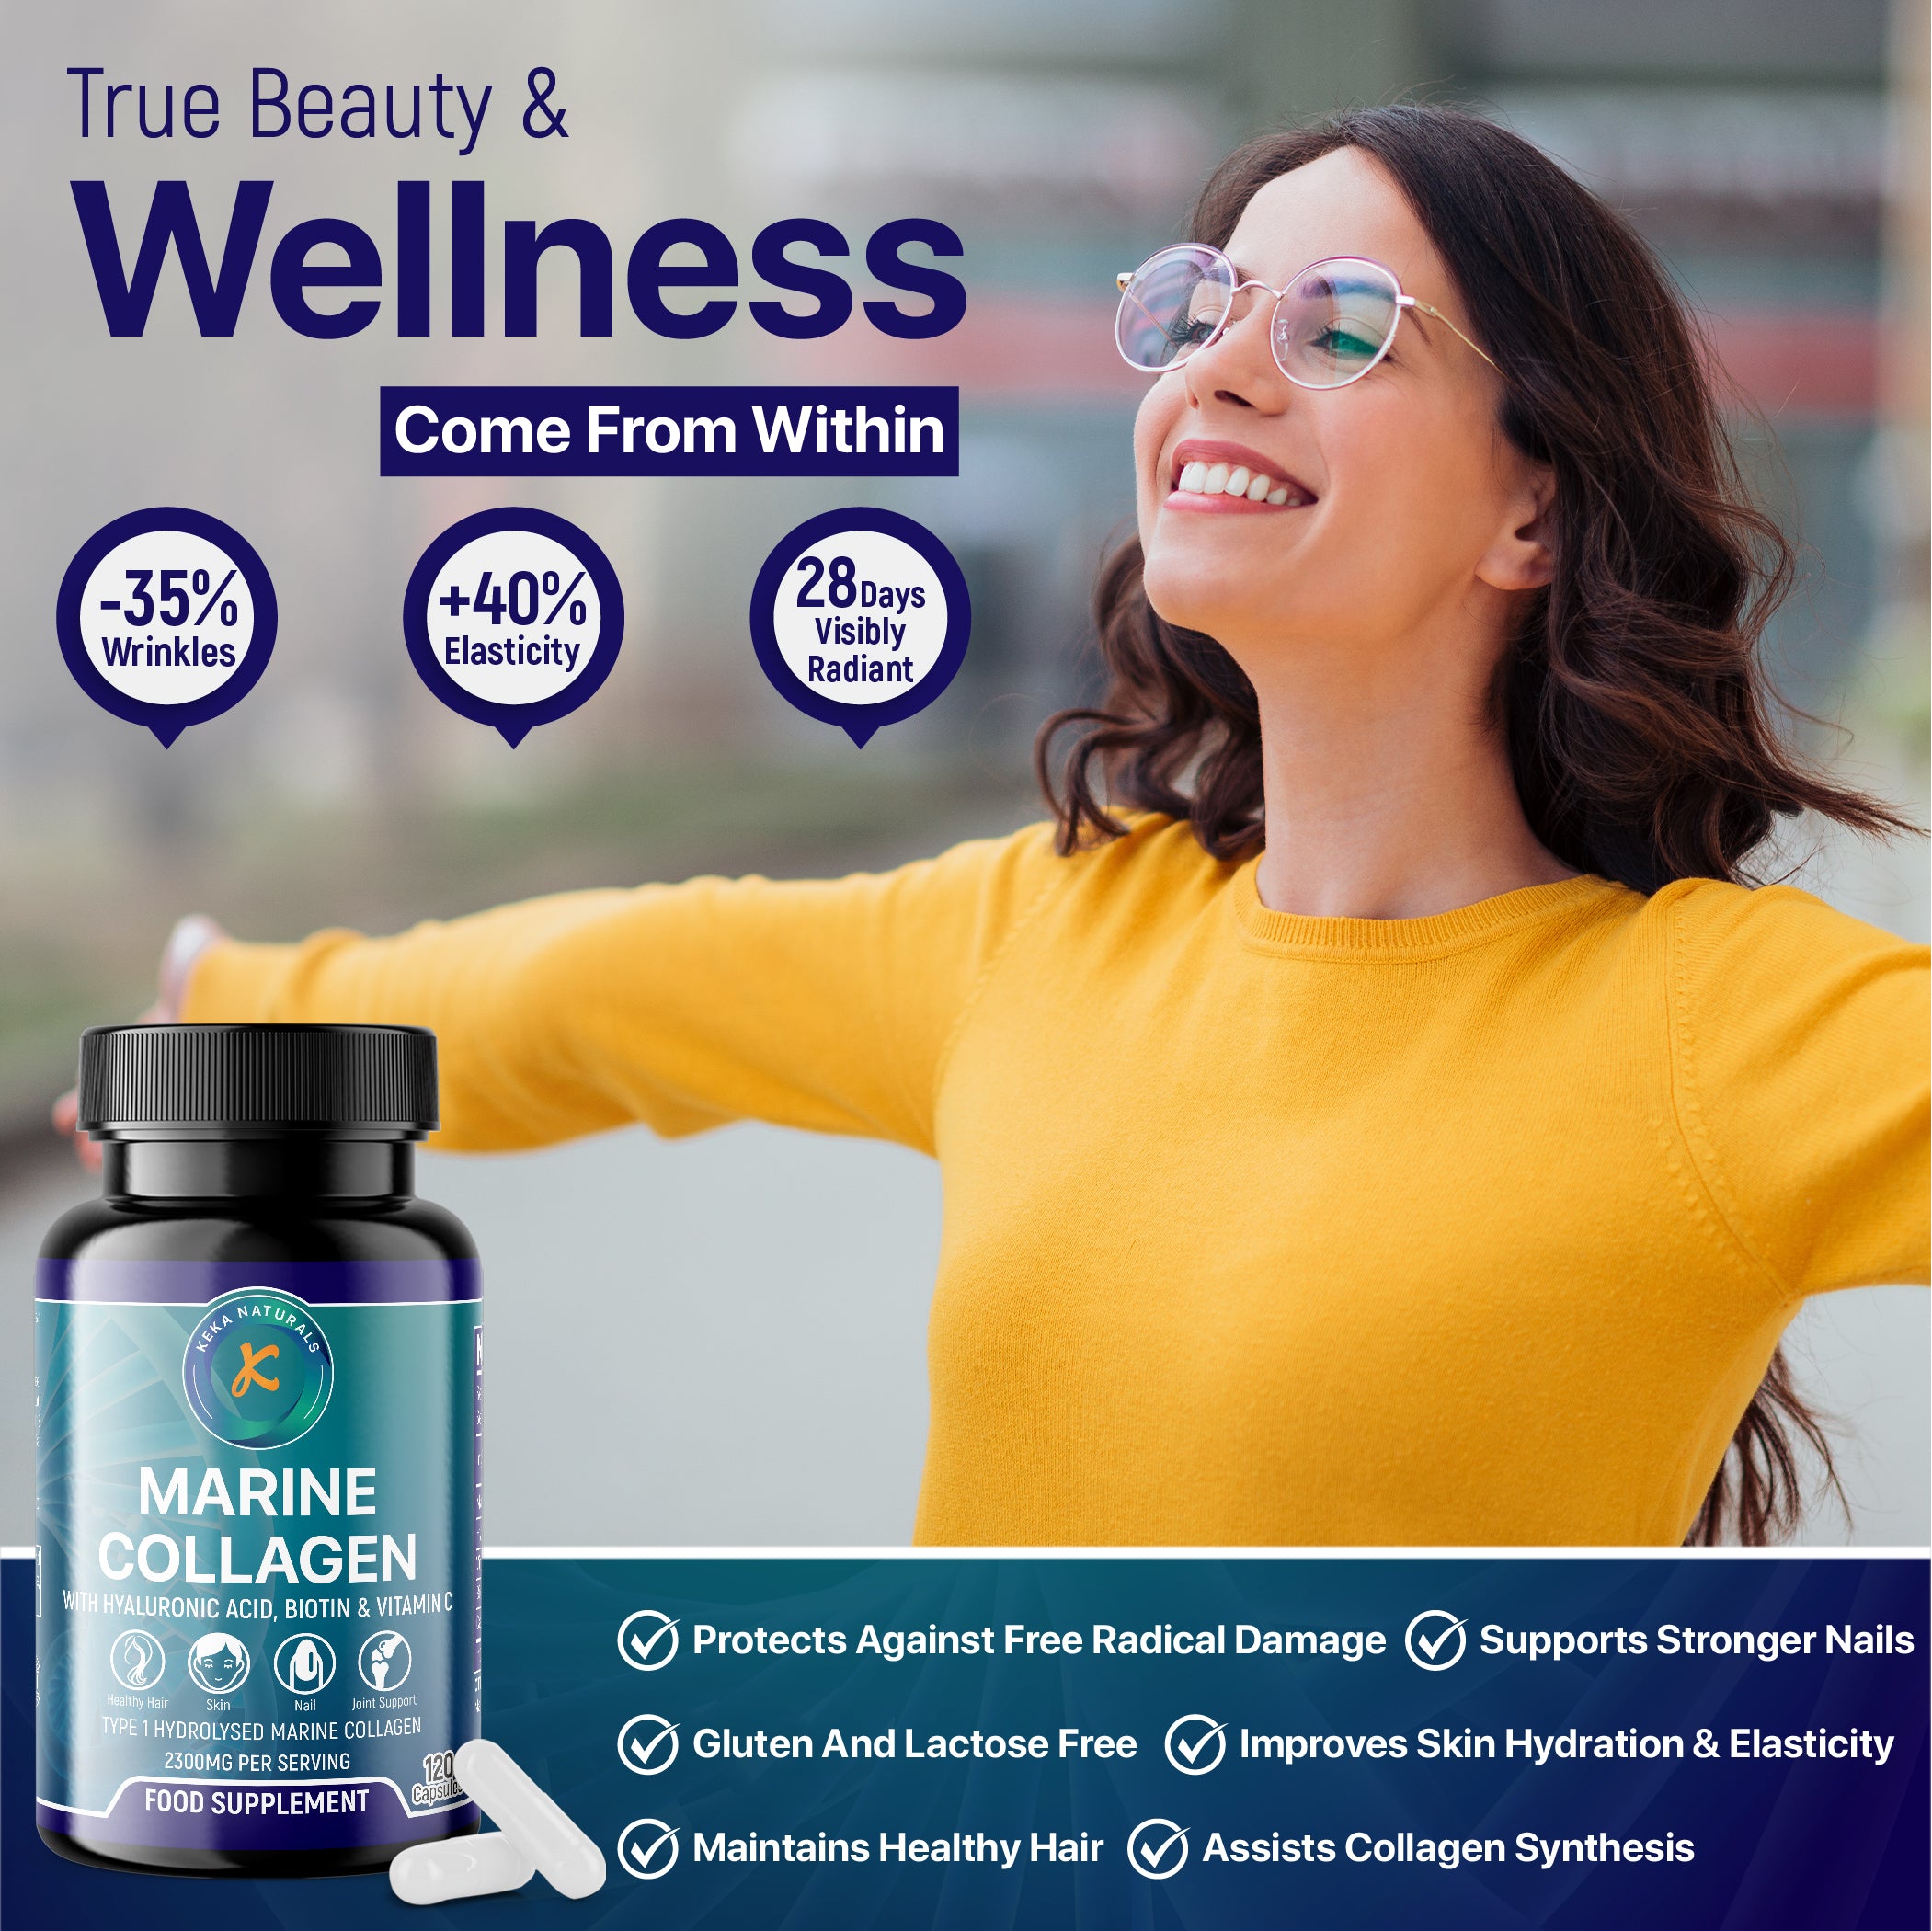 Marine Collagen with hyaluronic acid biotin and vitamin C 2300mg true beauty and wellness benefits for nails, hair, skin and more